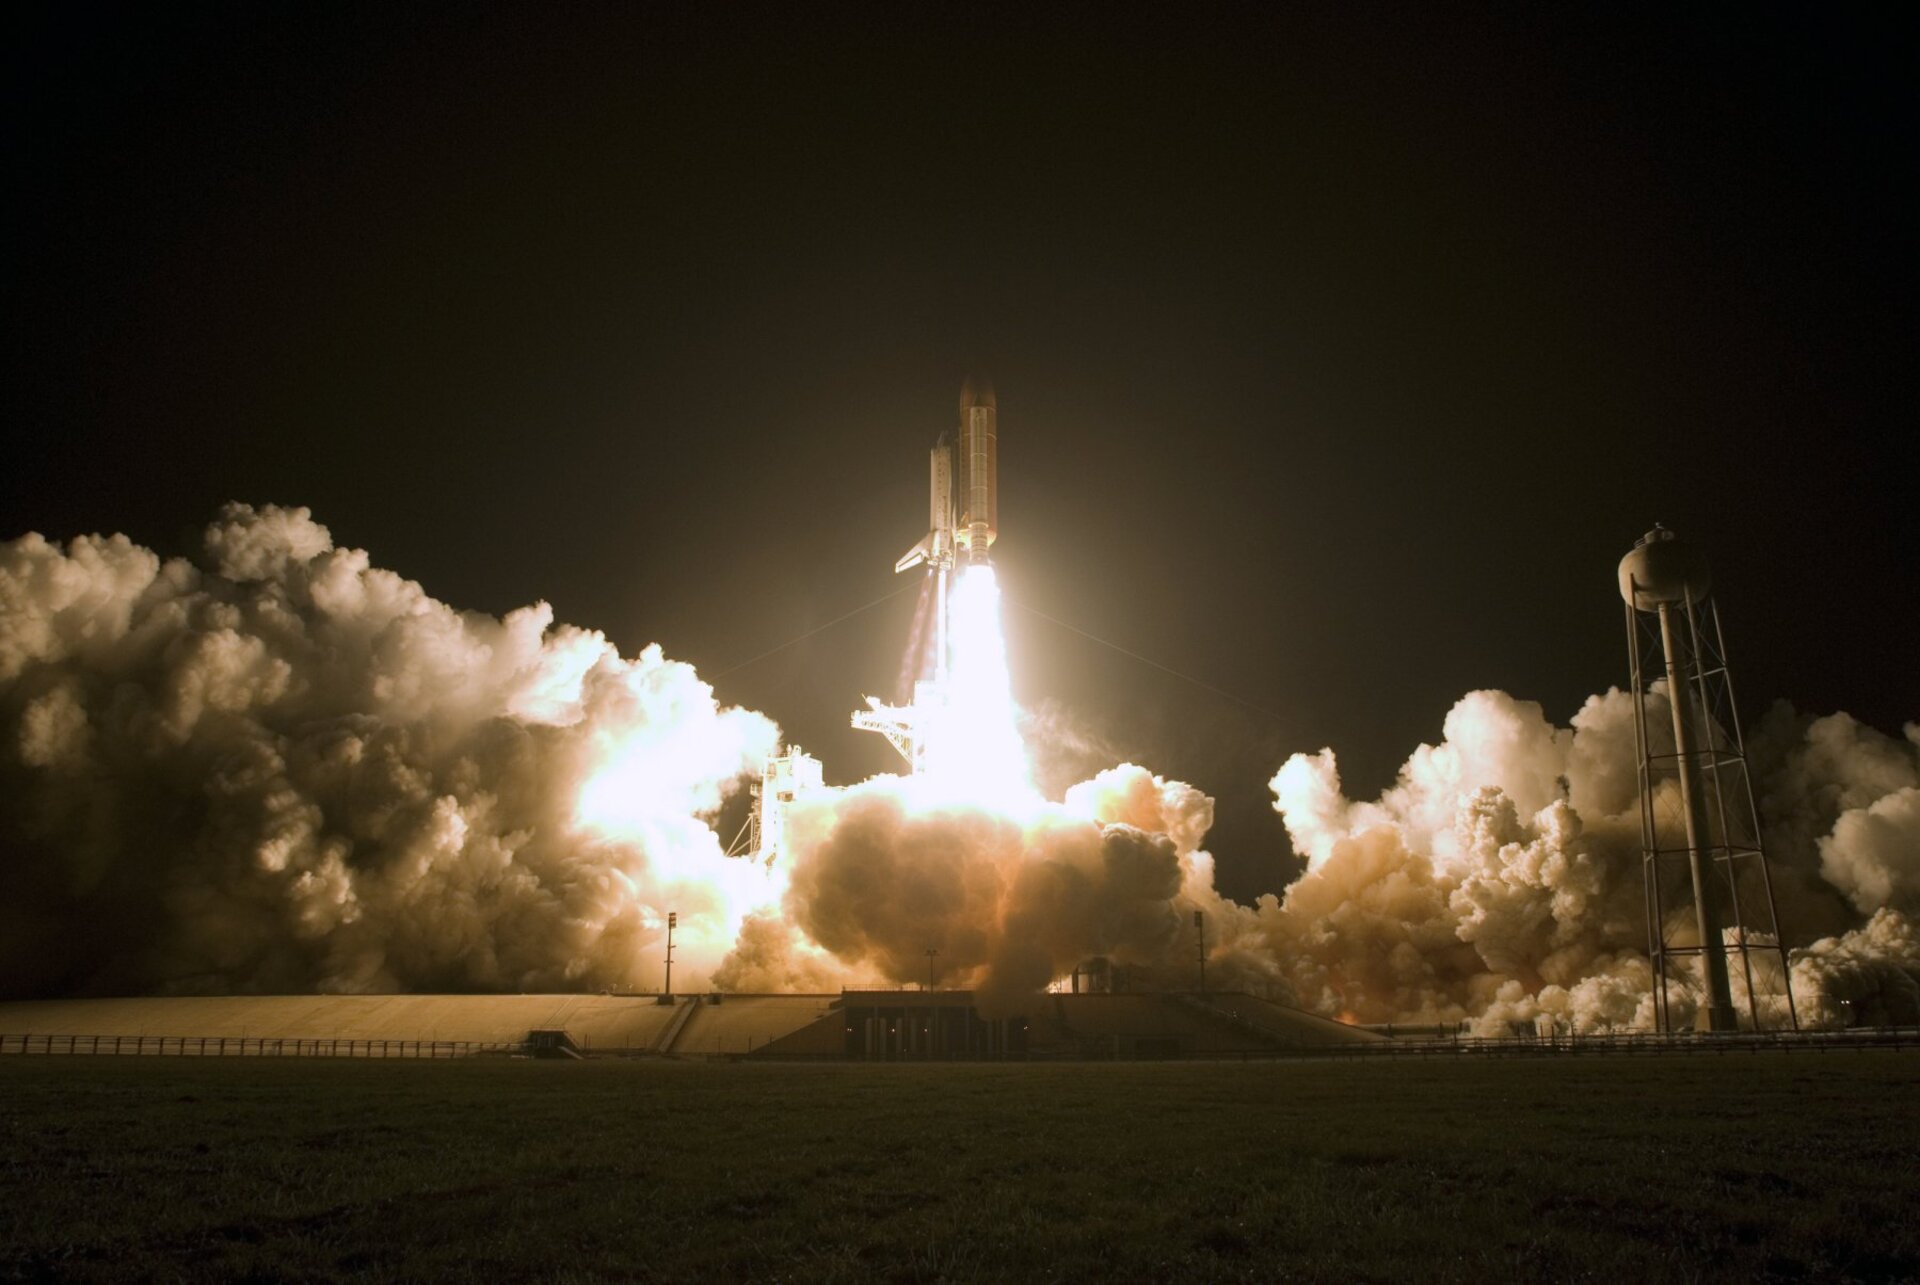 Launch of Space Shuttle Endeavour on the STS-126 mission